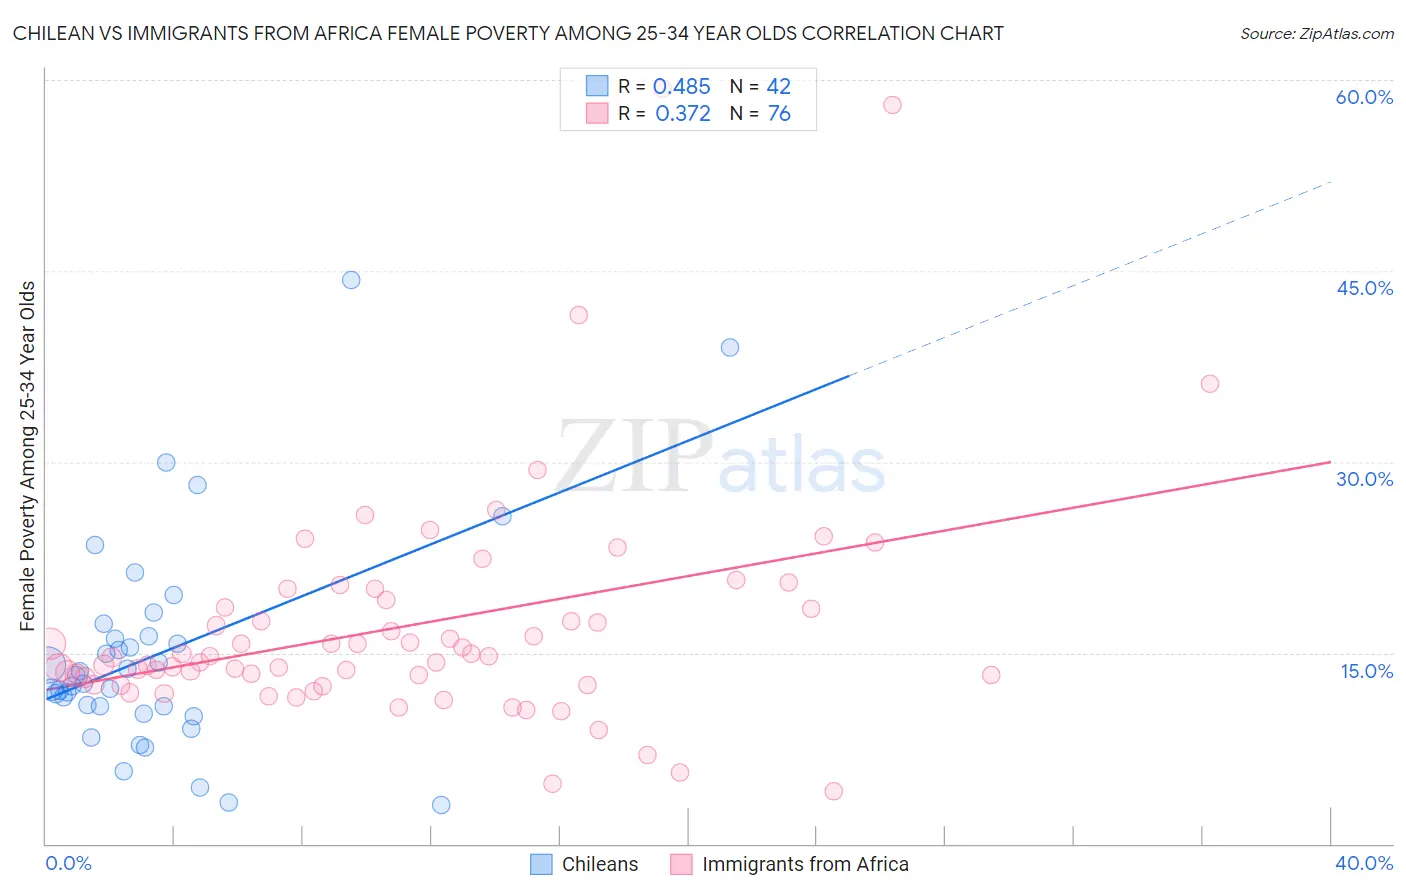 Chilean vs Immigrants from Africa Female Poverty Among 25-34 Year Olds